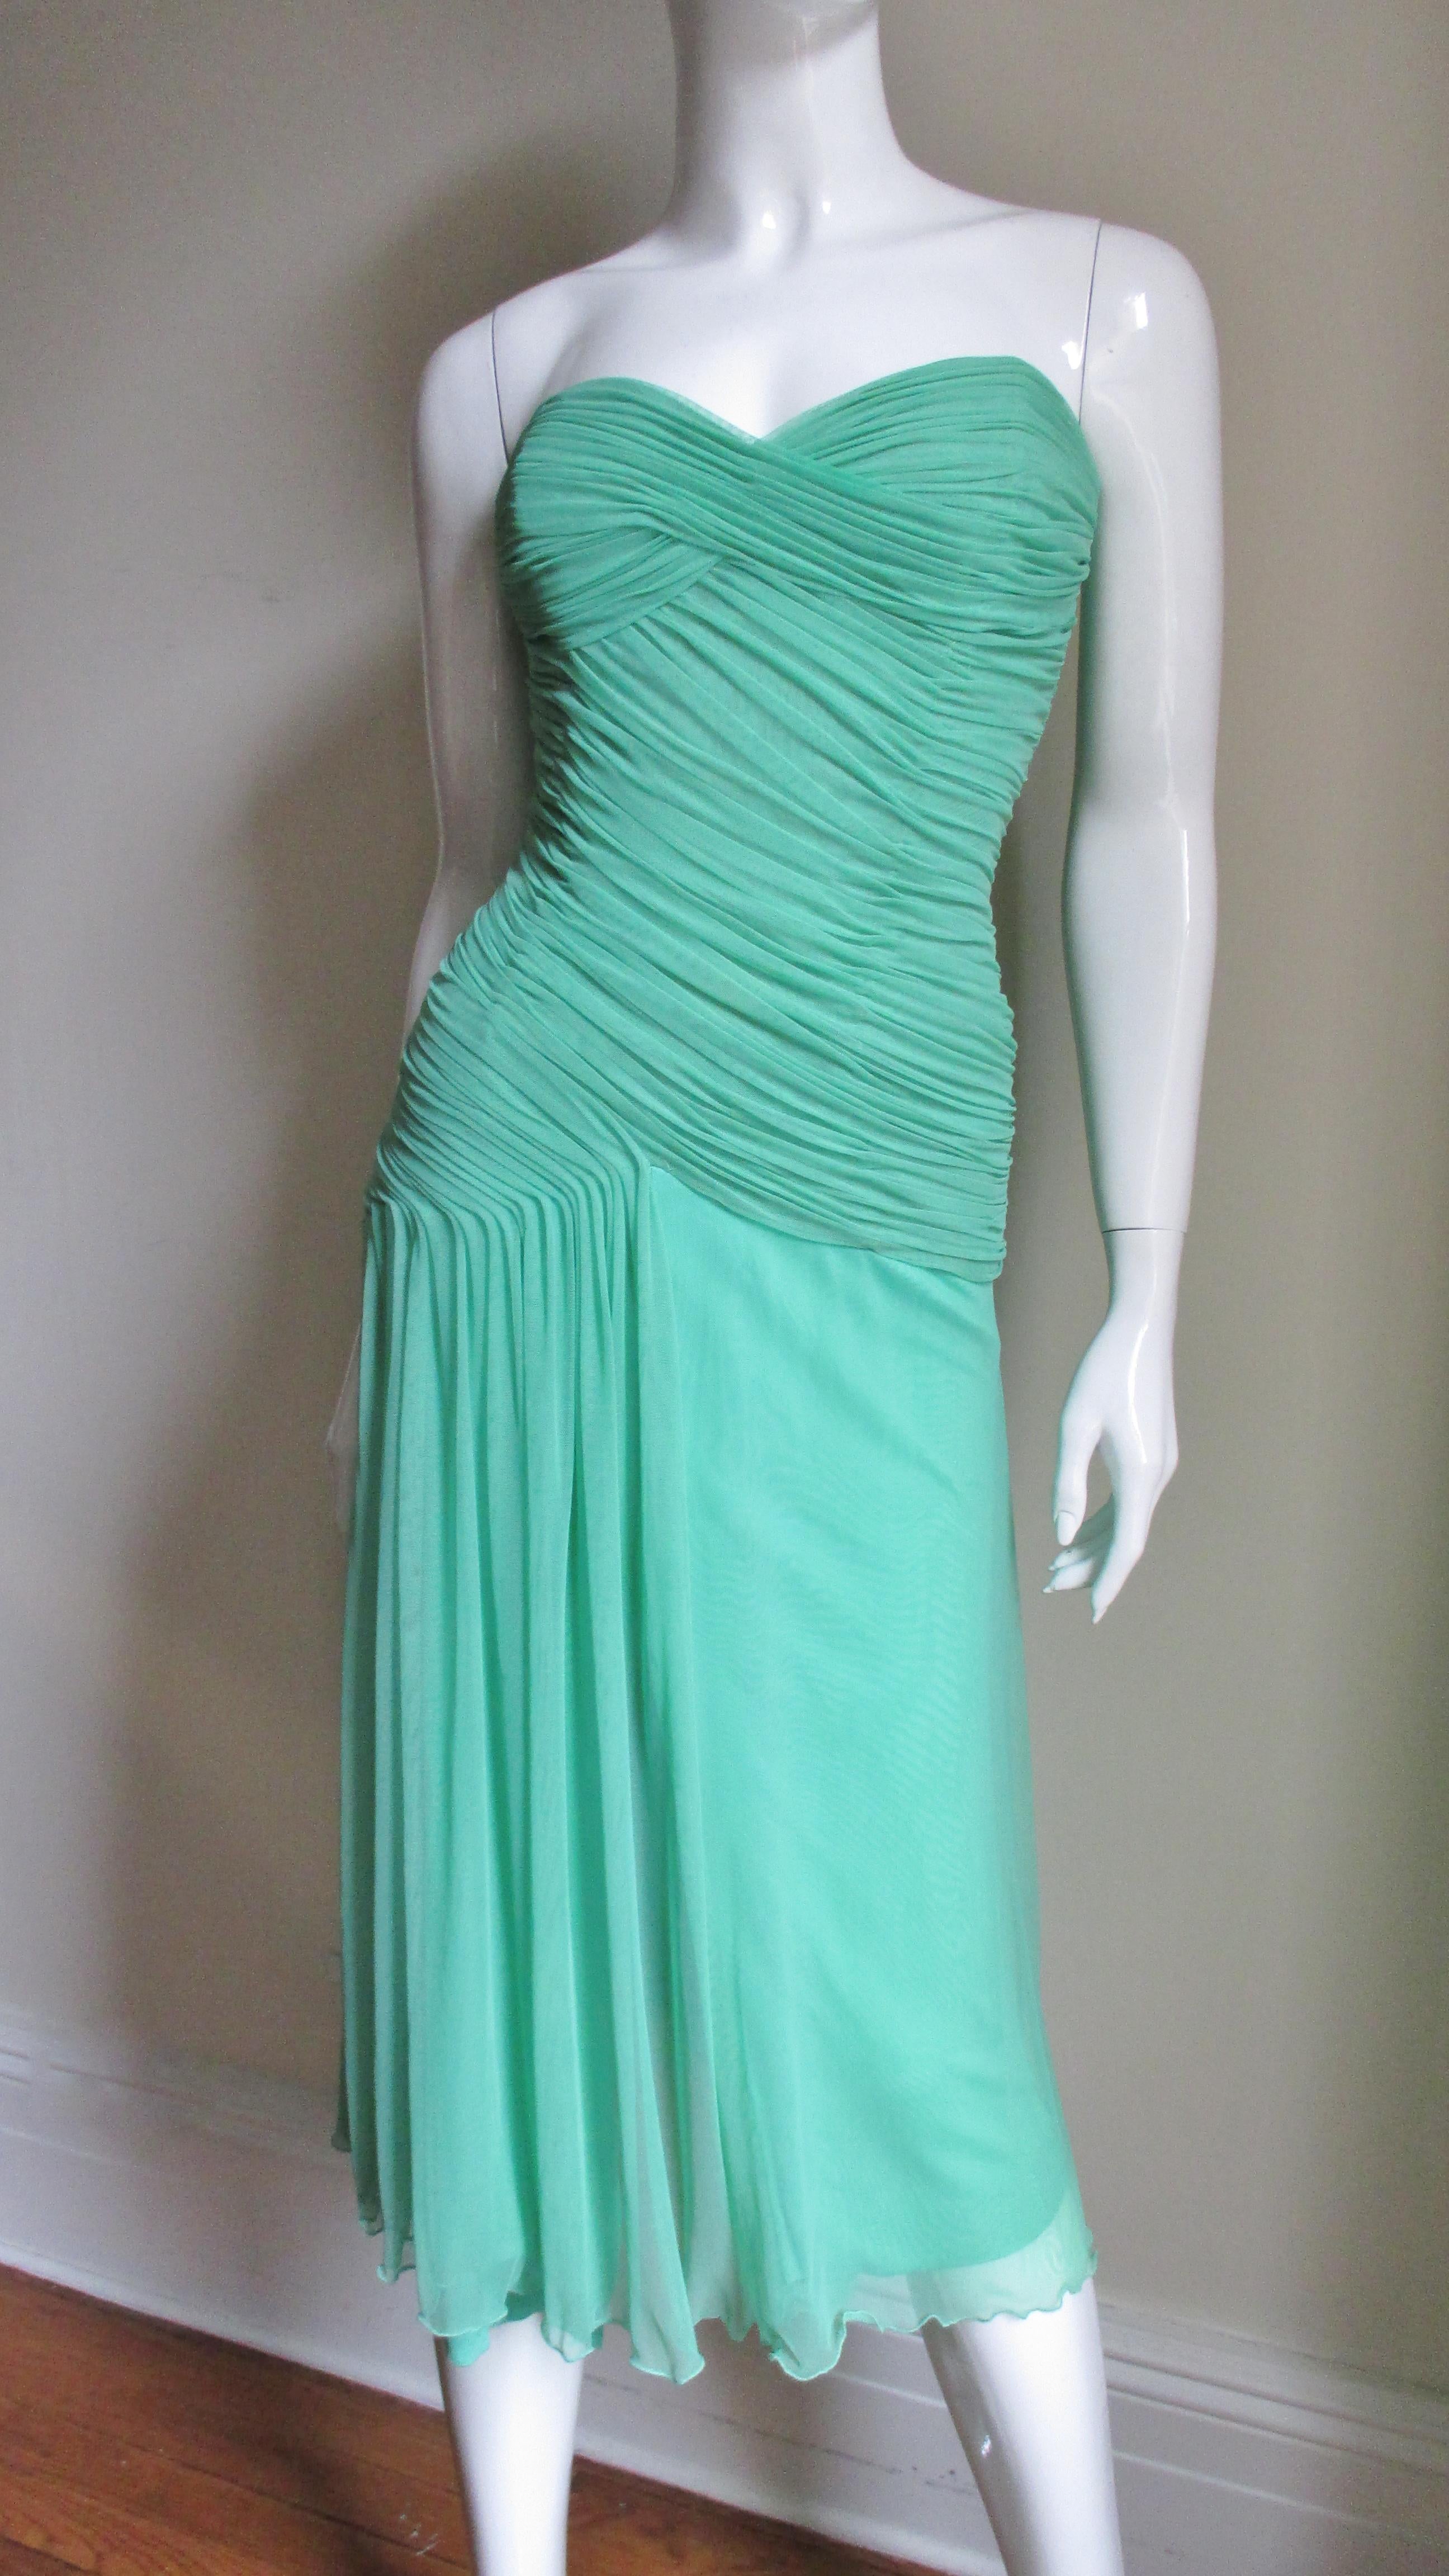 A fabulous stretch silk net dress from Vicky Tiel Couture in a beautiful shade of green. It has a boned strapless corset style bodice wrapped flatteringly with ruching crisscrossing the bust line, wrapping on an angle around the waist then draping